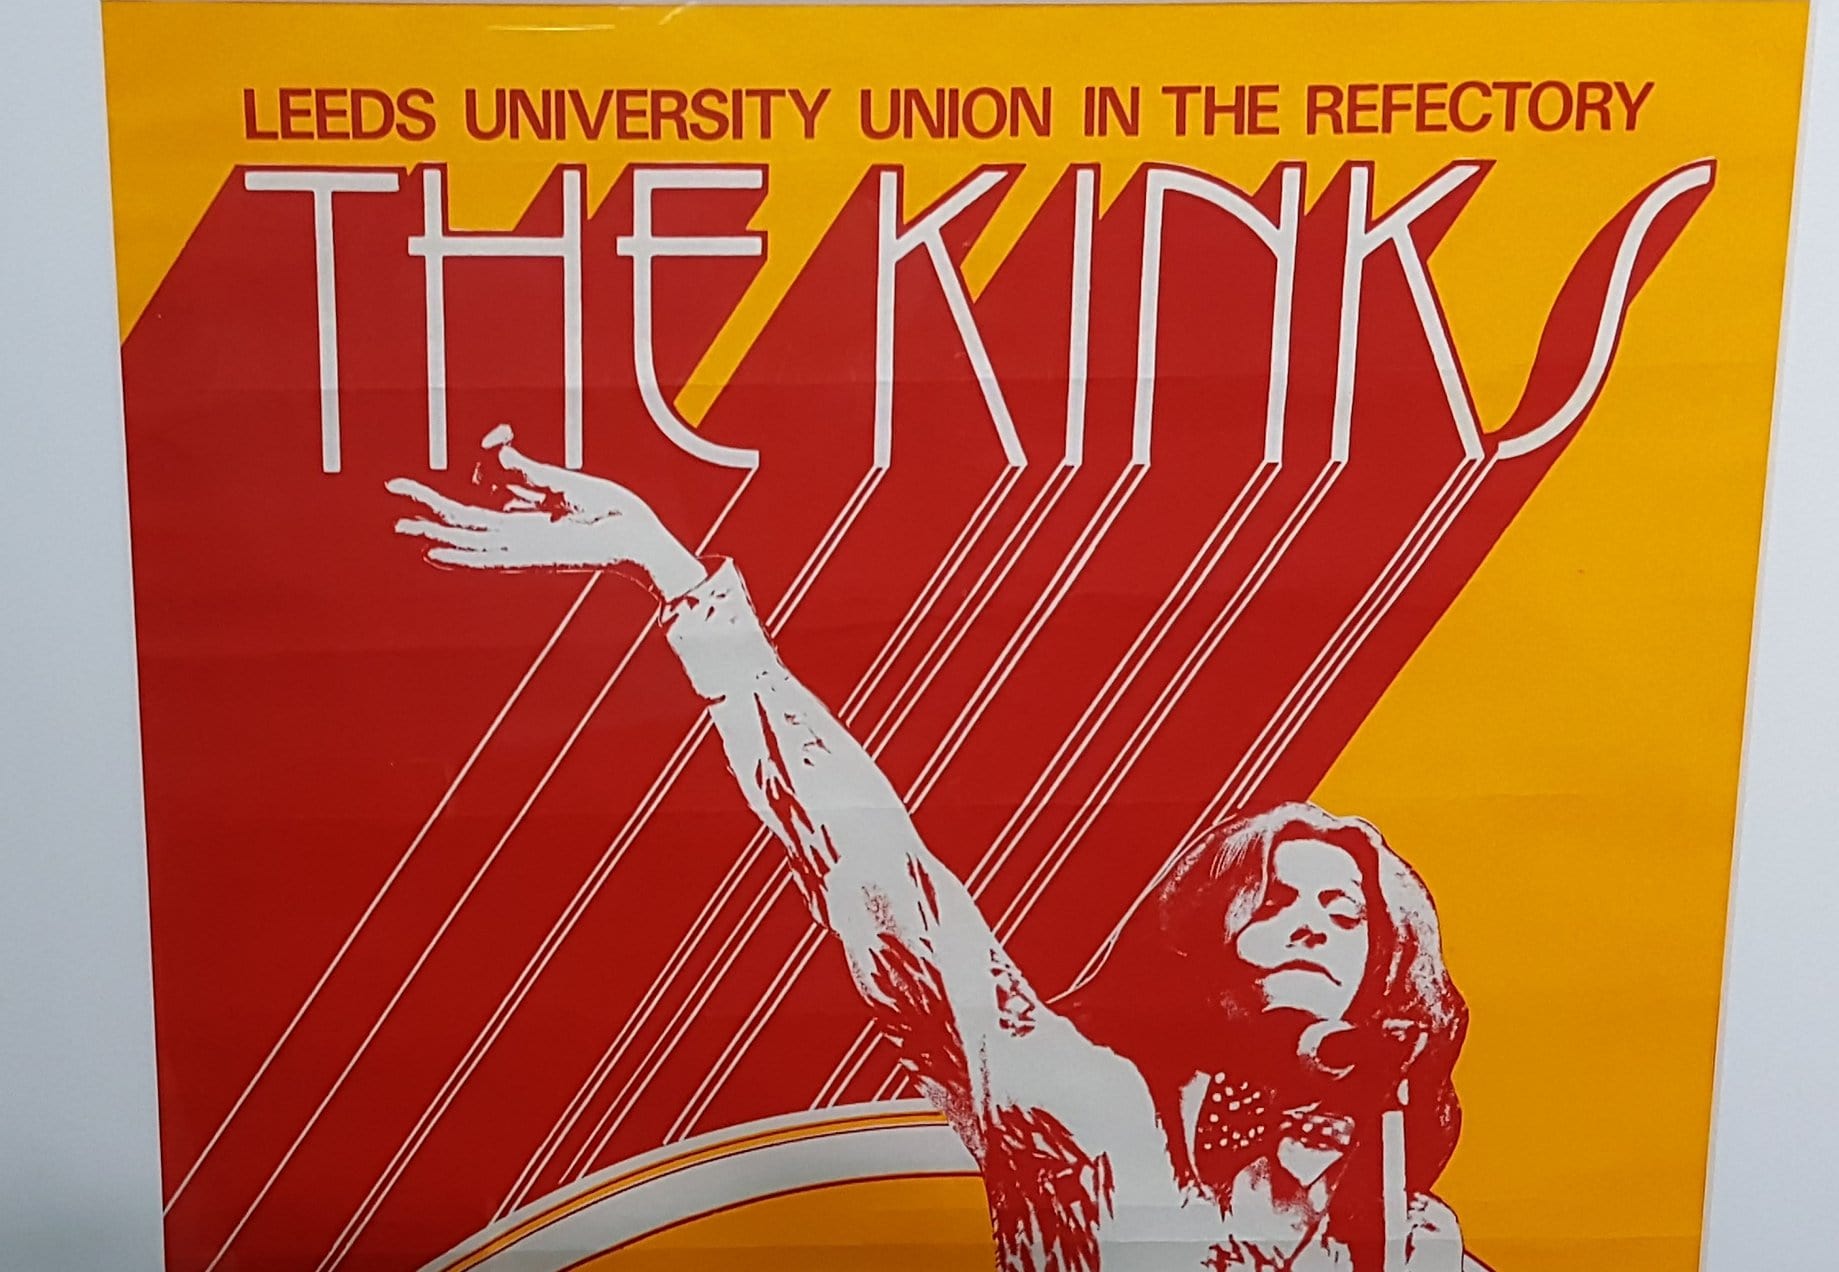 Live at Leeds: the 'Soap Opera' Tour, 1975 Enlarged